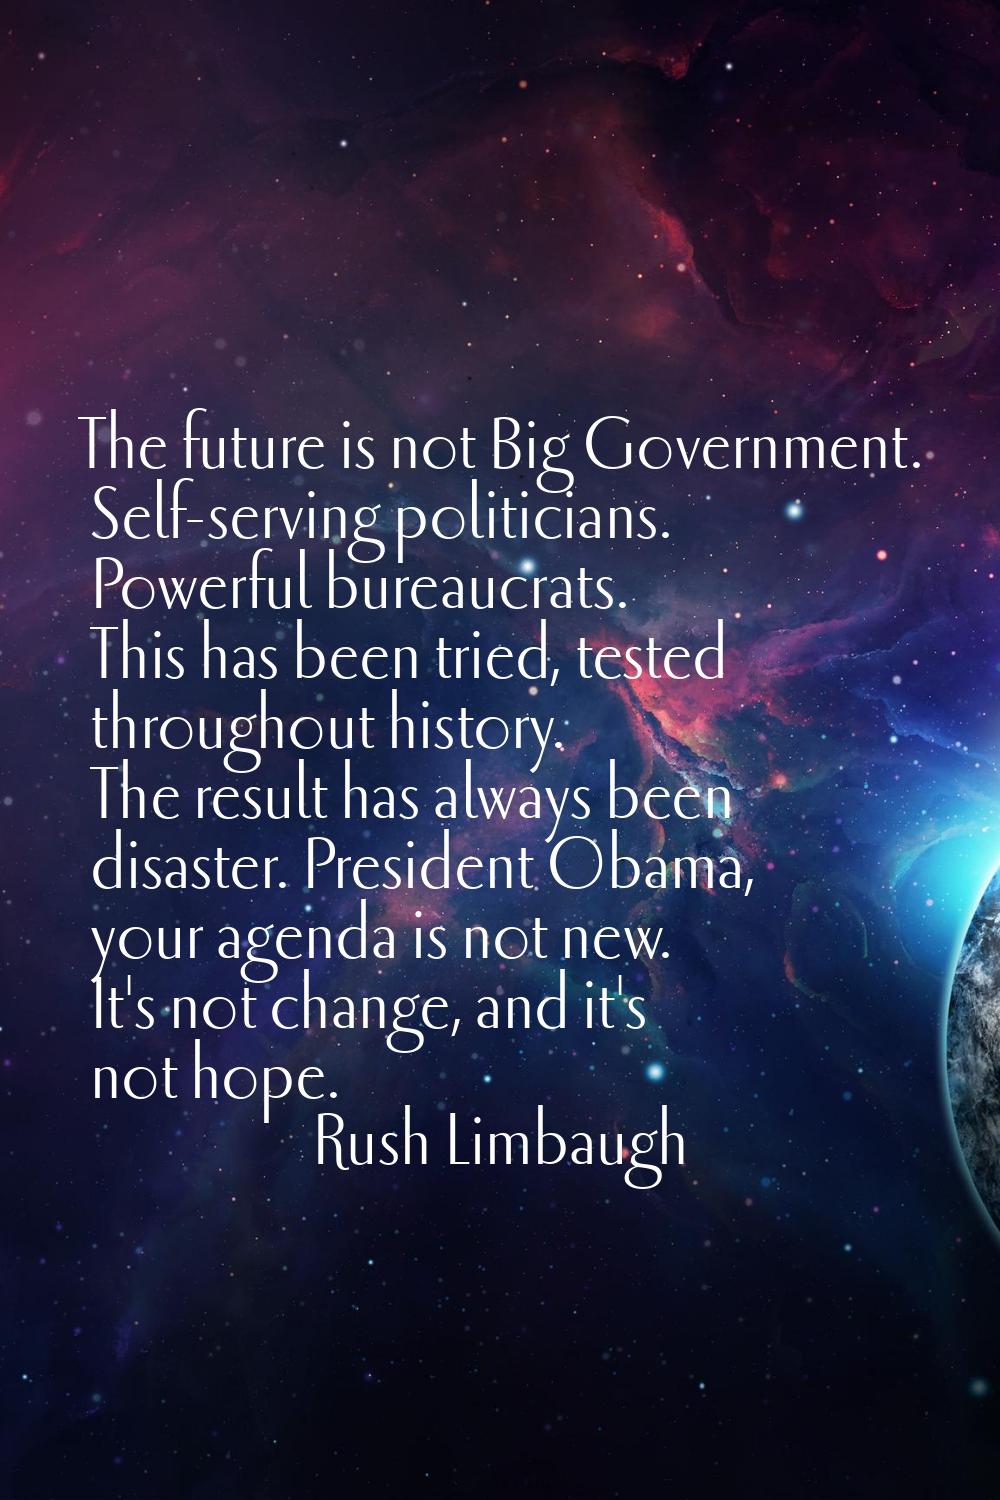 The future is not Big Government. Self-serving politicians. Powerful bureaucrats. This has been tri